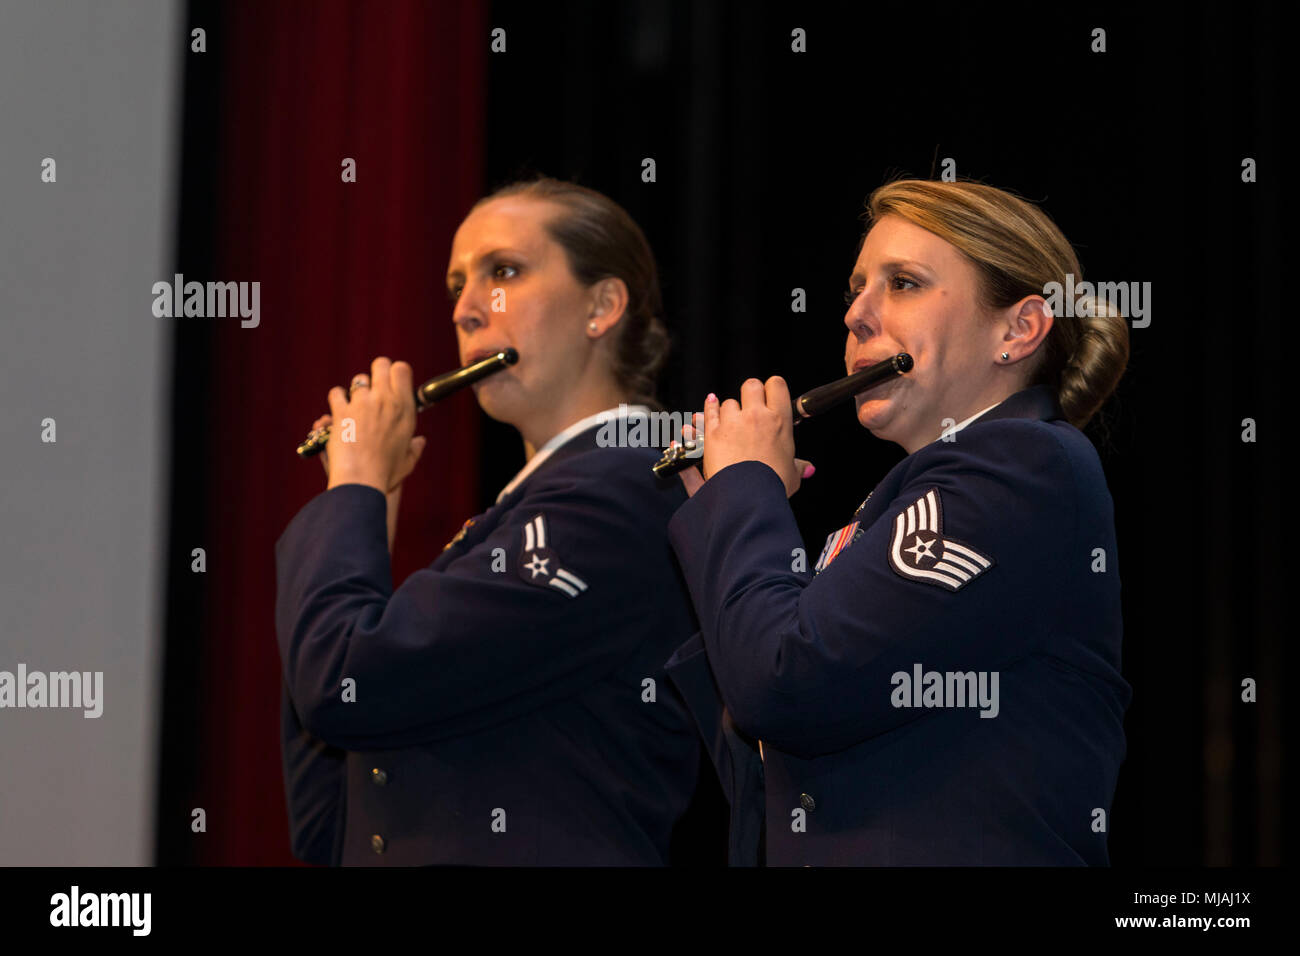 Flutists Airmen 1st Class Elizabeth Robinson (left) and Staff Sgt. Carolyn Sierichs (right), from Band of the West perform as part of Fiesta in Blue in San Antonio, Texas April 24, 2018. The act was dedicated to the 300th Anniversary of San Antonio and honors the city's military heritage. Since 1891, Fiesta has grown into an annual celebration that includes civic and military observances, exhibits, sports, music and food representing the spirit, diversity and vitality of San Antonio. (U.S. Air Force photo by Ismael Ortega / Released) Stock Photo